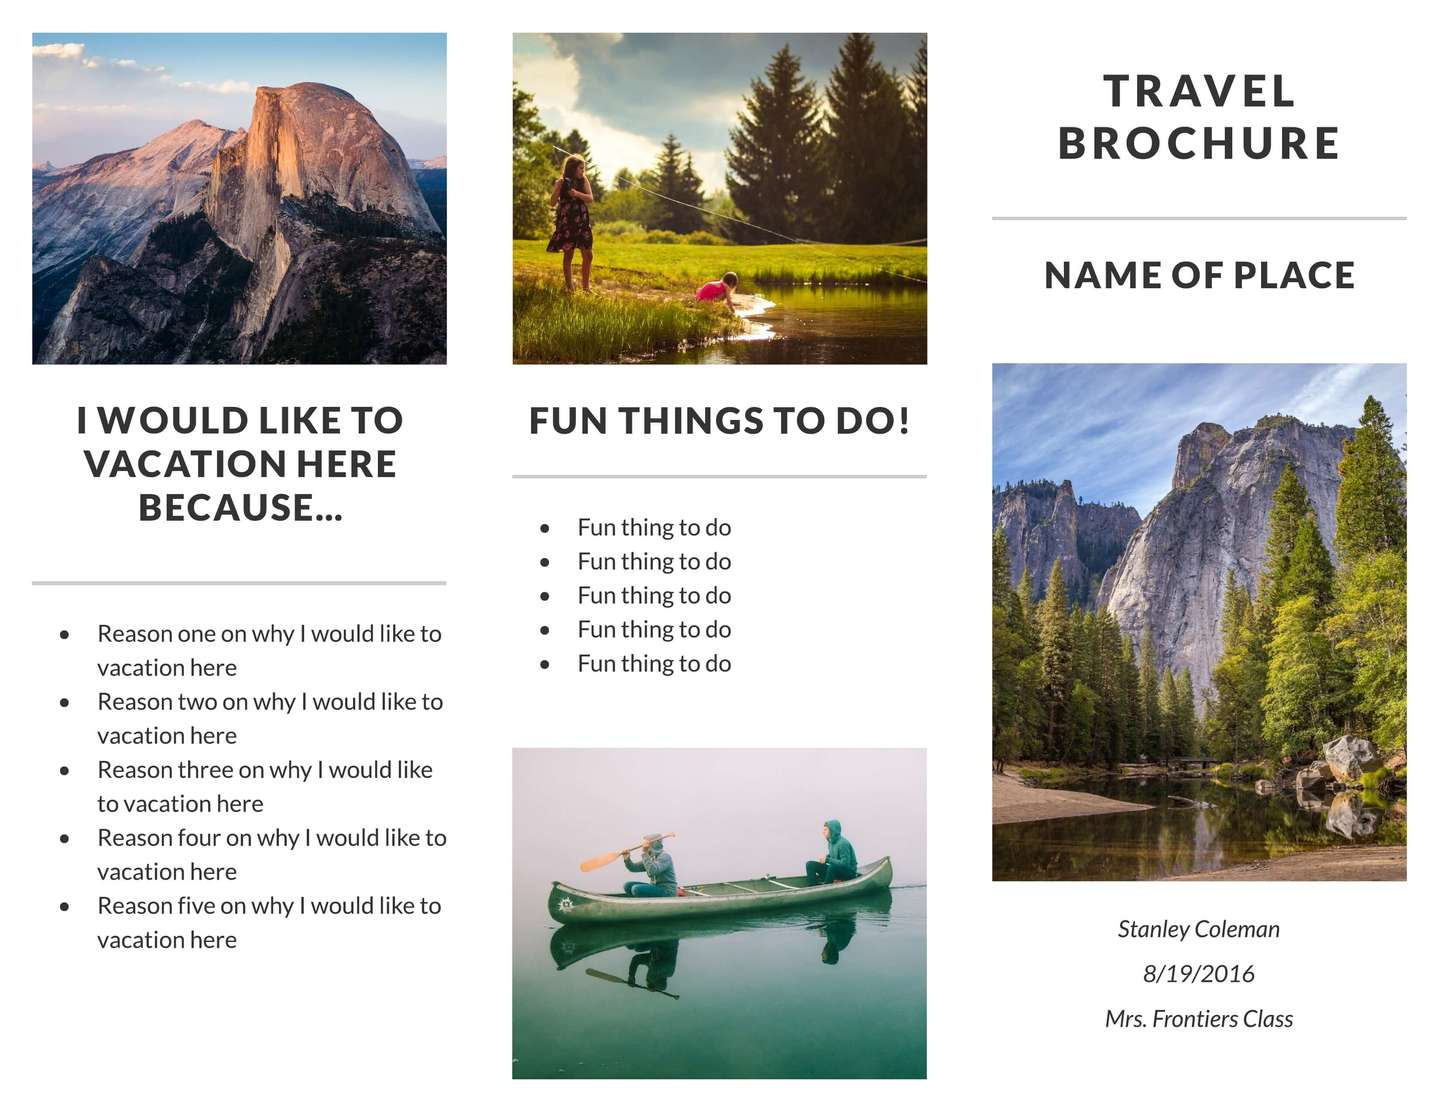 Free Travel Brochure Templates & Examples [8 Free Templates] Pertaining To Travel And Tourism Brochure Templates Free